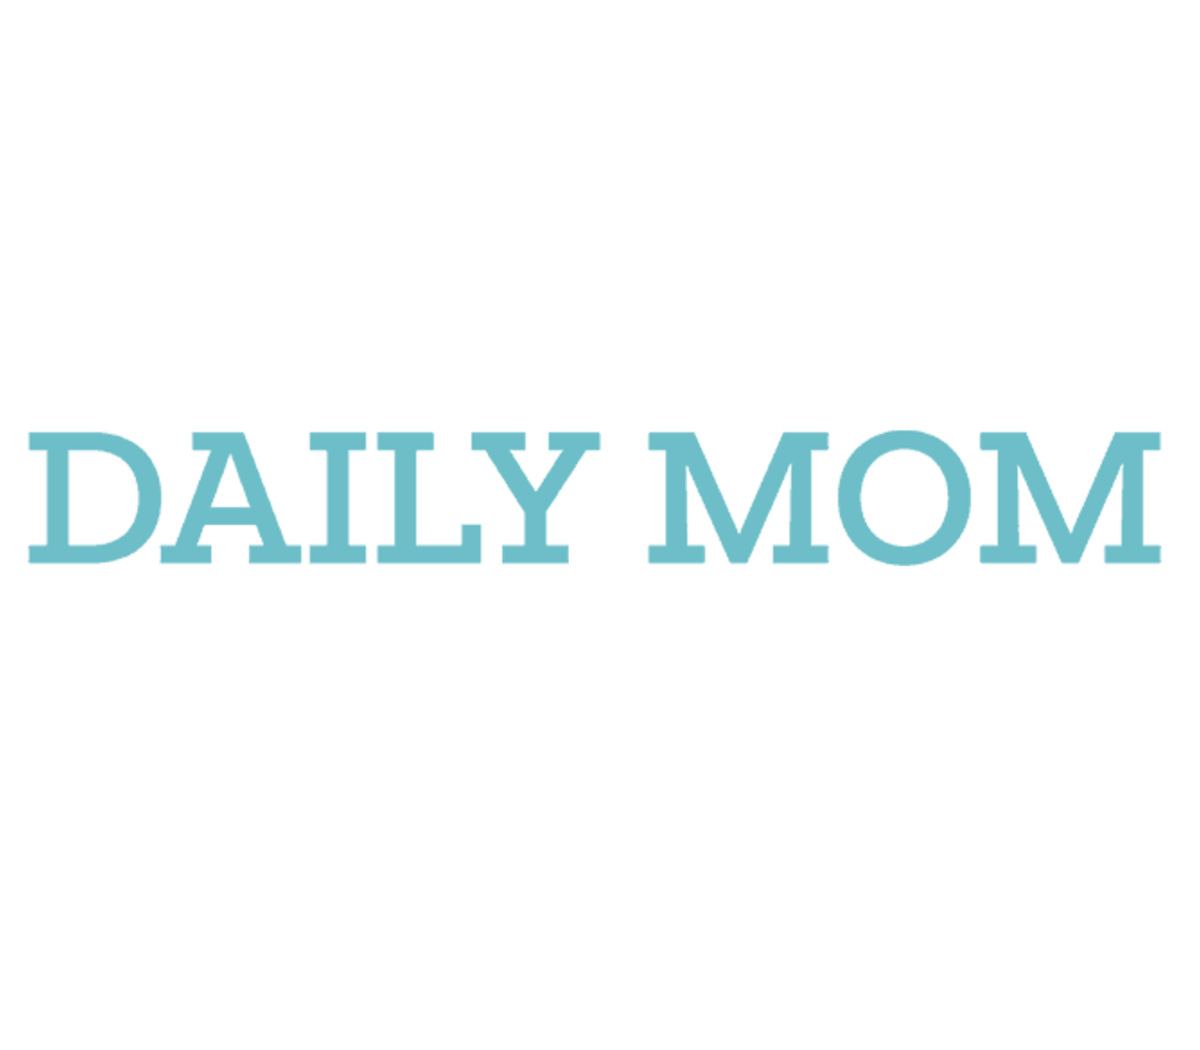 The Daily Mom for Yonder grass-fed collagen